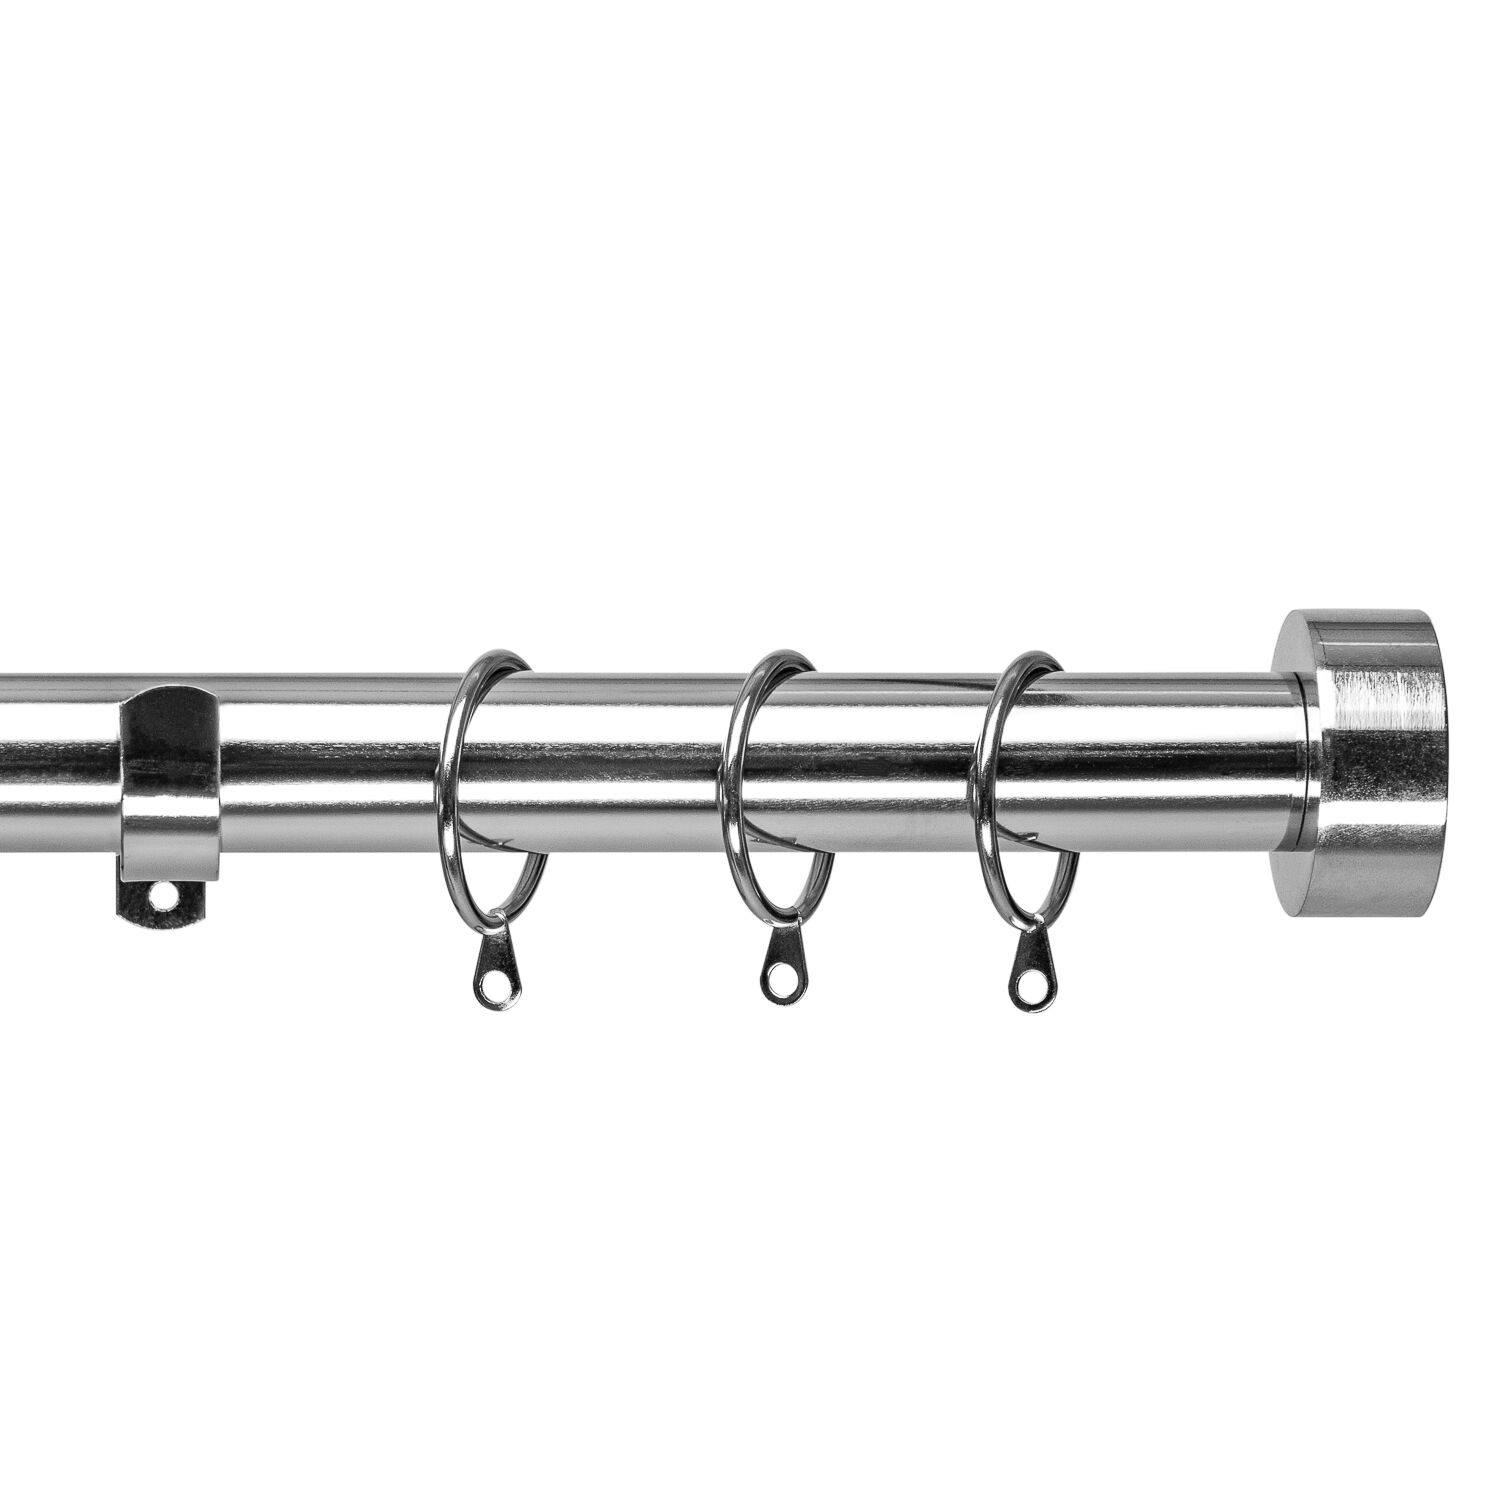 Diamond Extendable Metal Curtain Poles 28mm Includes Finals Rings Fittings DCUK 